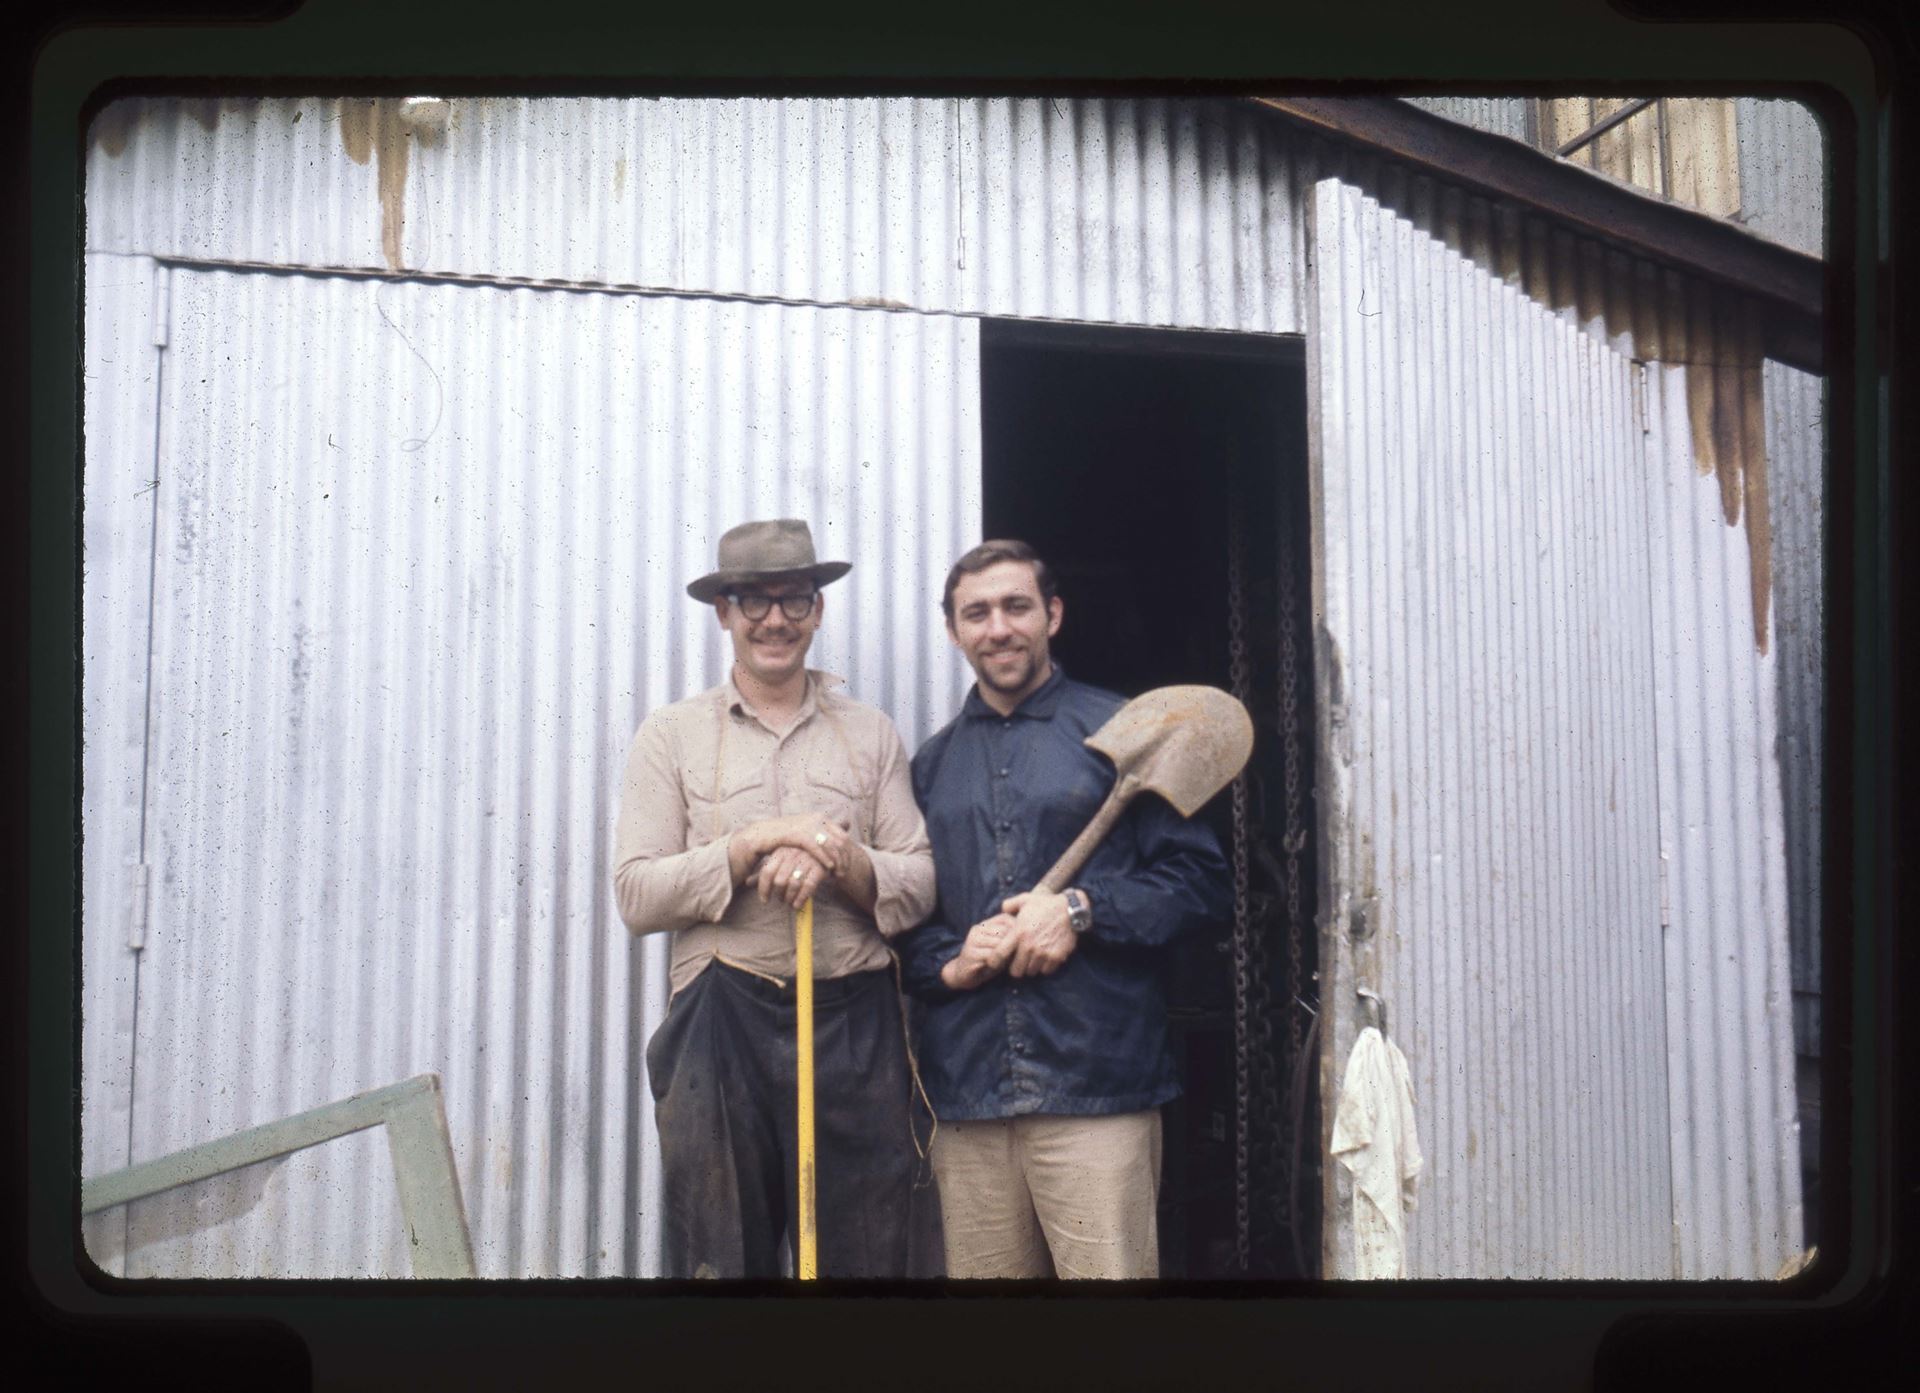 Michael Rubel and Dwayne Hunn with farm tools, ca. 1969-01 35mm slides (photographs), hunn-c2019-2-11-02~006, Michael Rubel and Dwayne Hunn with shovels during flood mud management, standing in front of Tractor Shed, "JAN 69" stamped on slide mount, Rubelia, Rubel Castle, Rubel Pharms, Rubel Farms, ca. January, 1969.